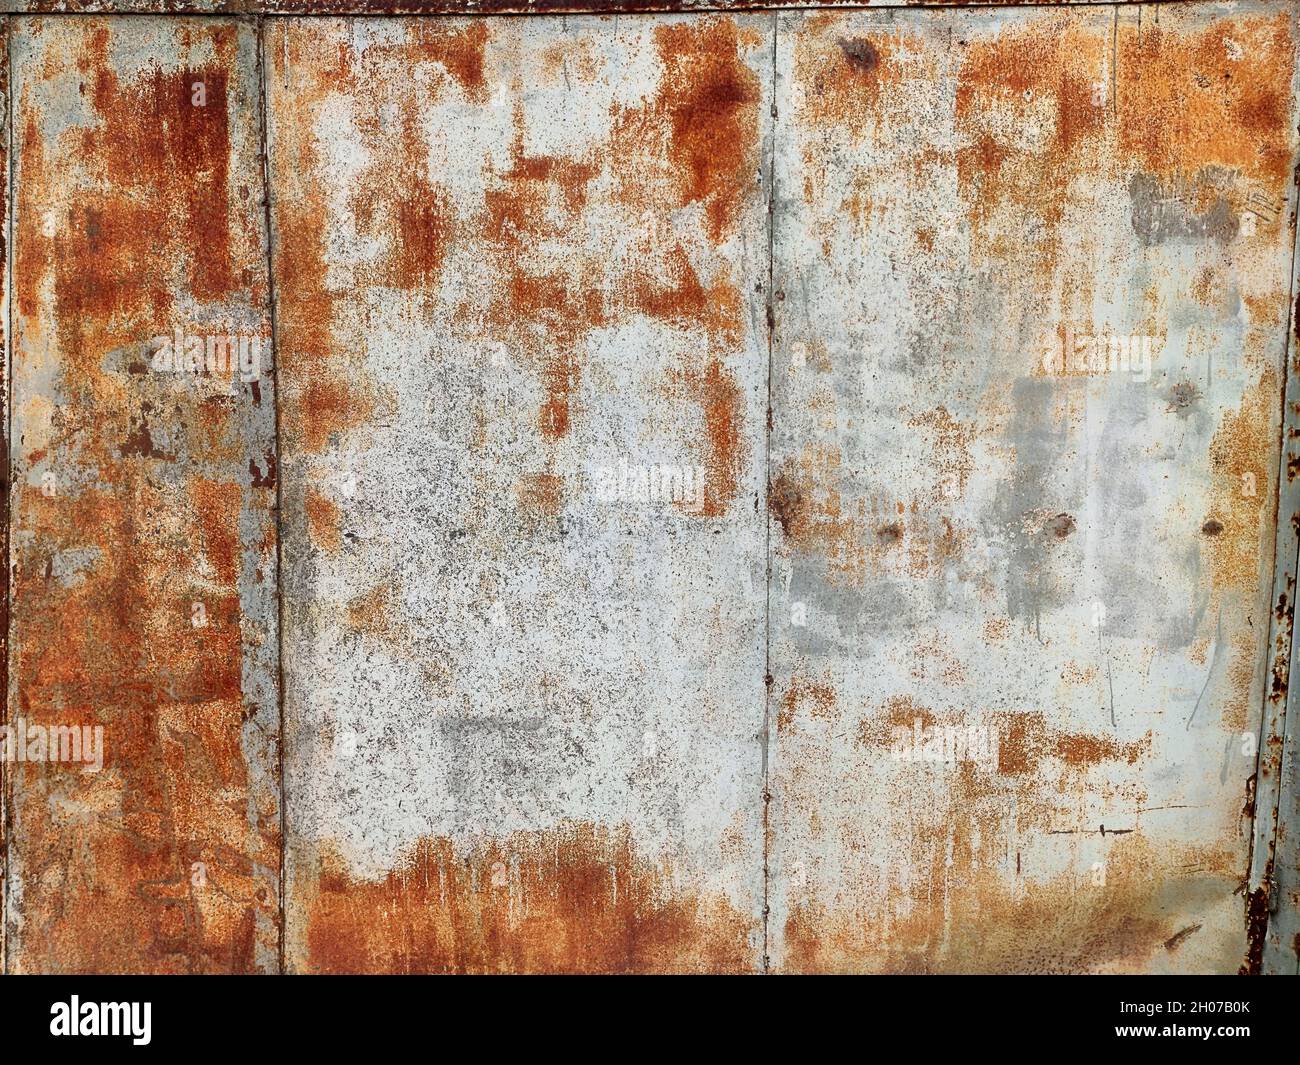 Corroded metal background. Rusted white painted metal wall. Rusty metal background with streaks of rust. Rust stains. The metal surface rusted spots. Stock Photo